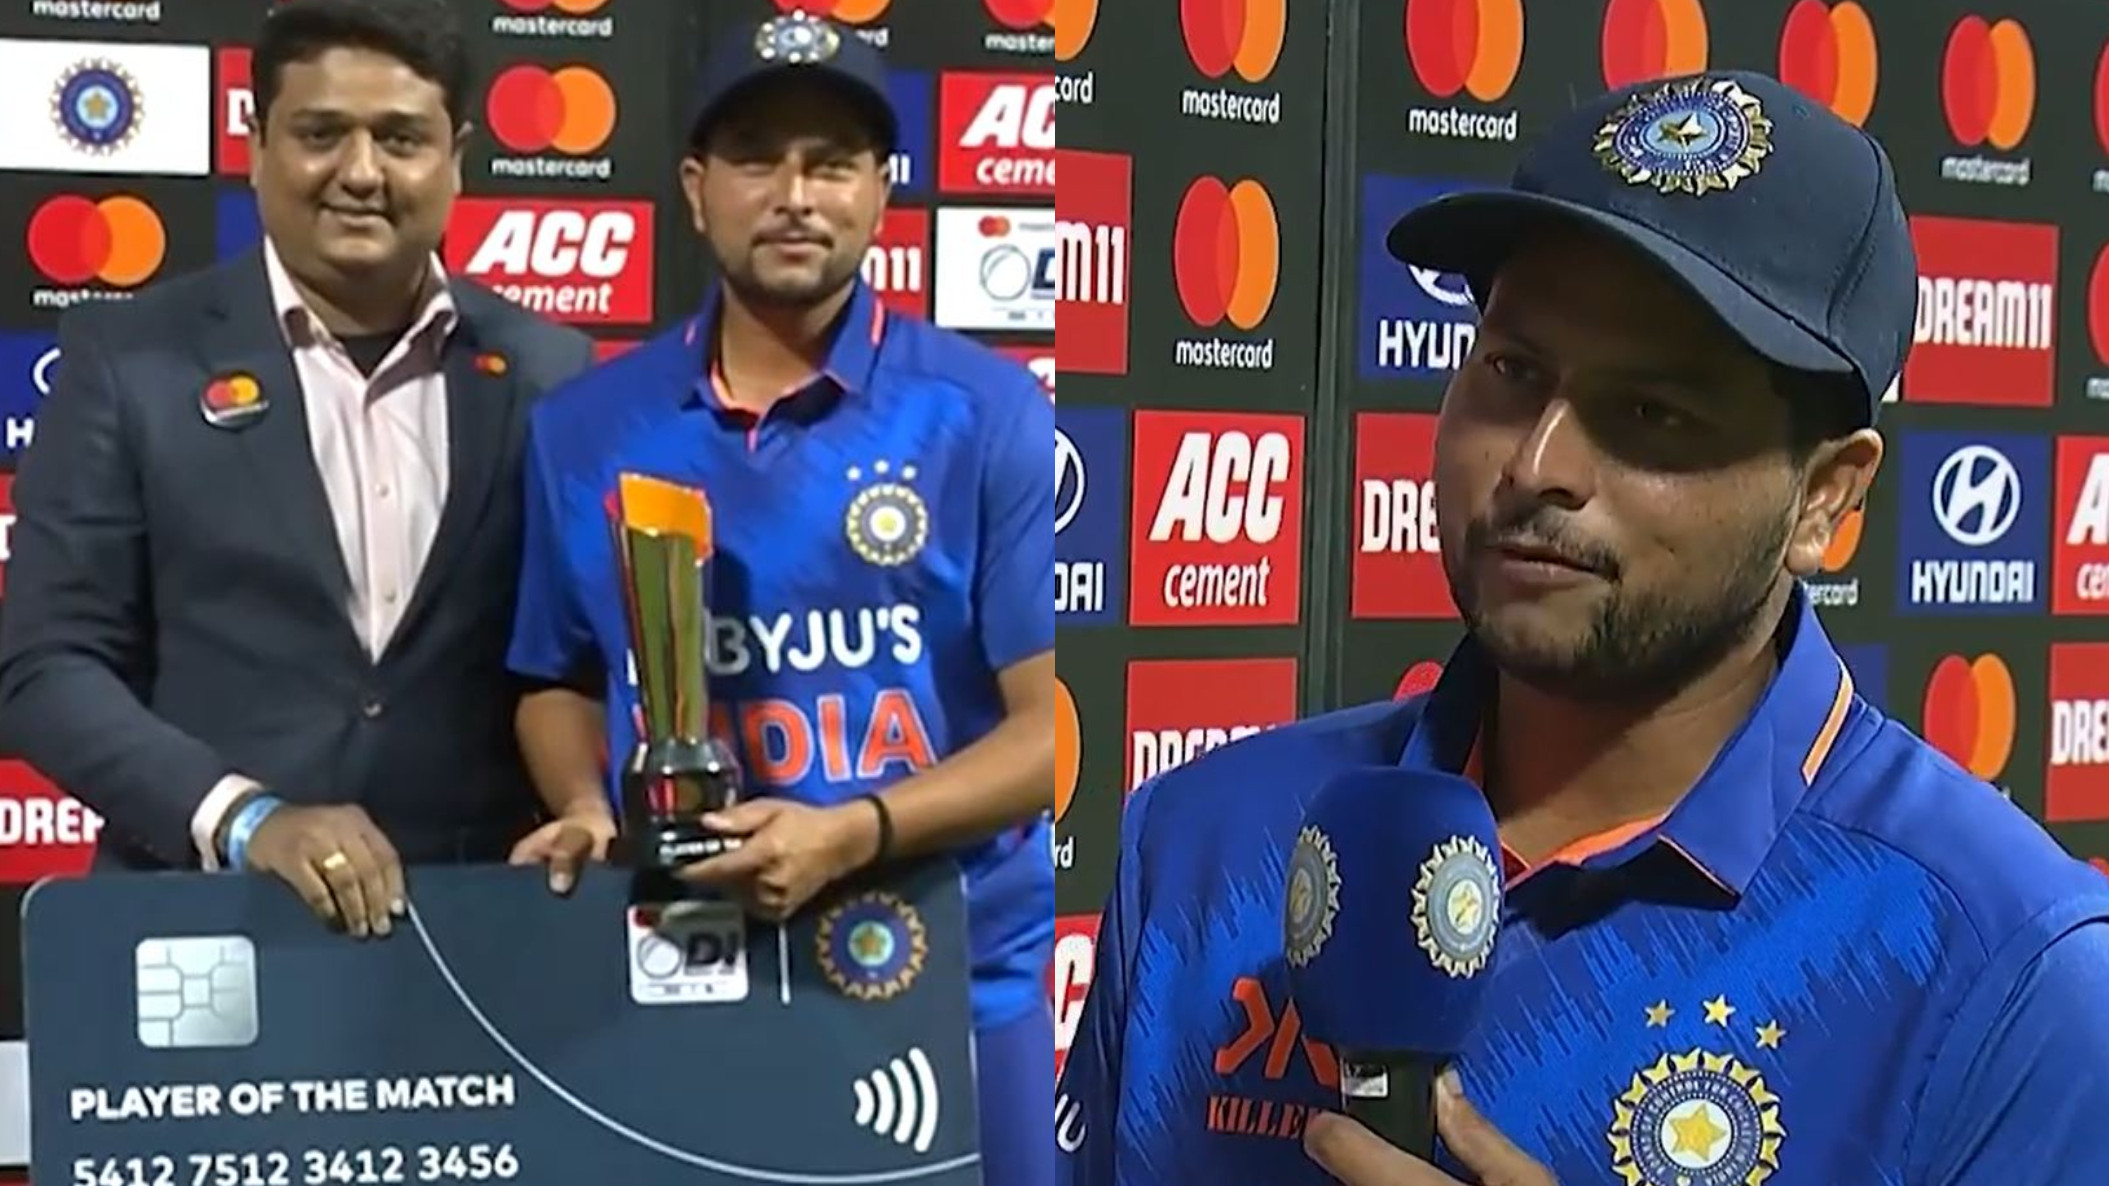 IND v SL 2023: “Whatever opportunities I get, I try to do my best”- Kuldeep Yadav after terrific performance in 2nd ODI